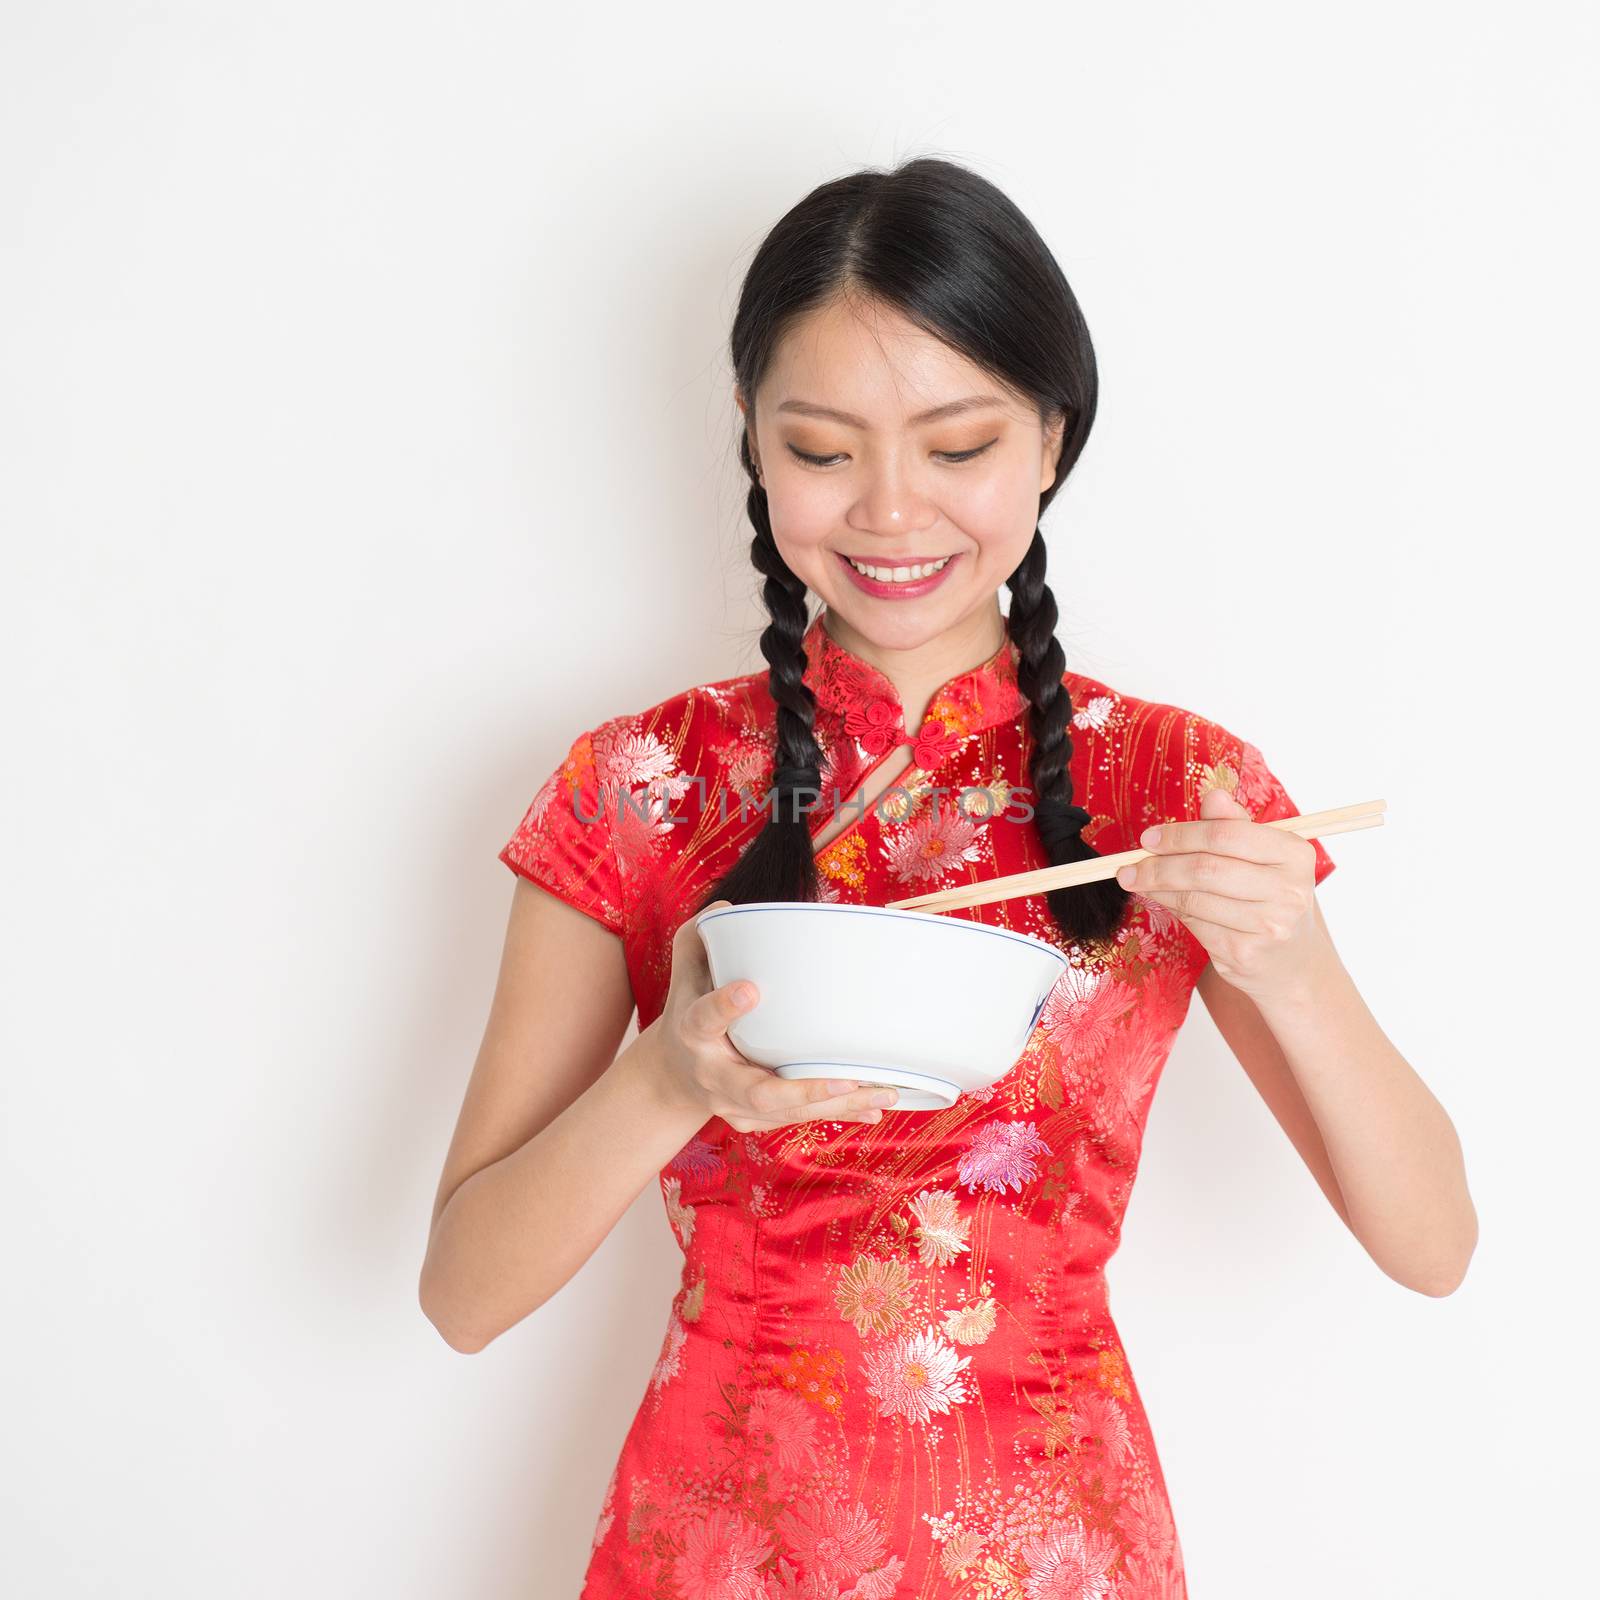 Portrait of Asian Chinese female eating, using chopsticks holding rice bowl, in traditional dress red qipao standing on plain background.